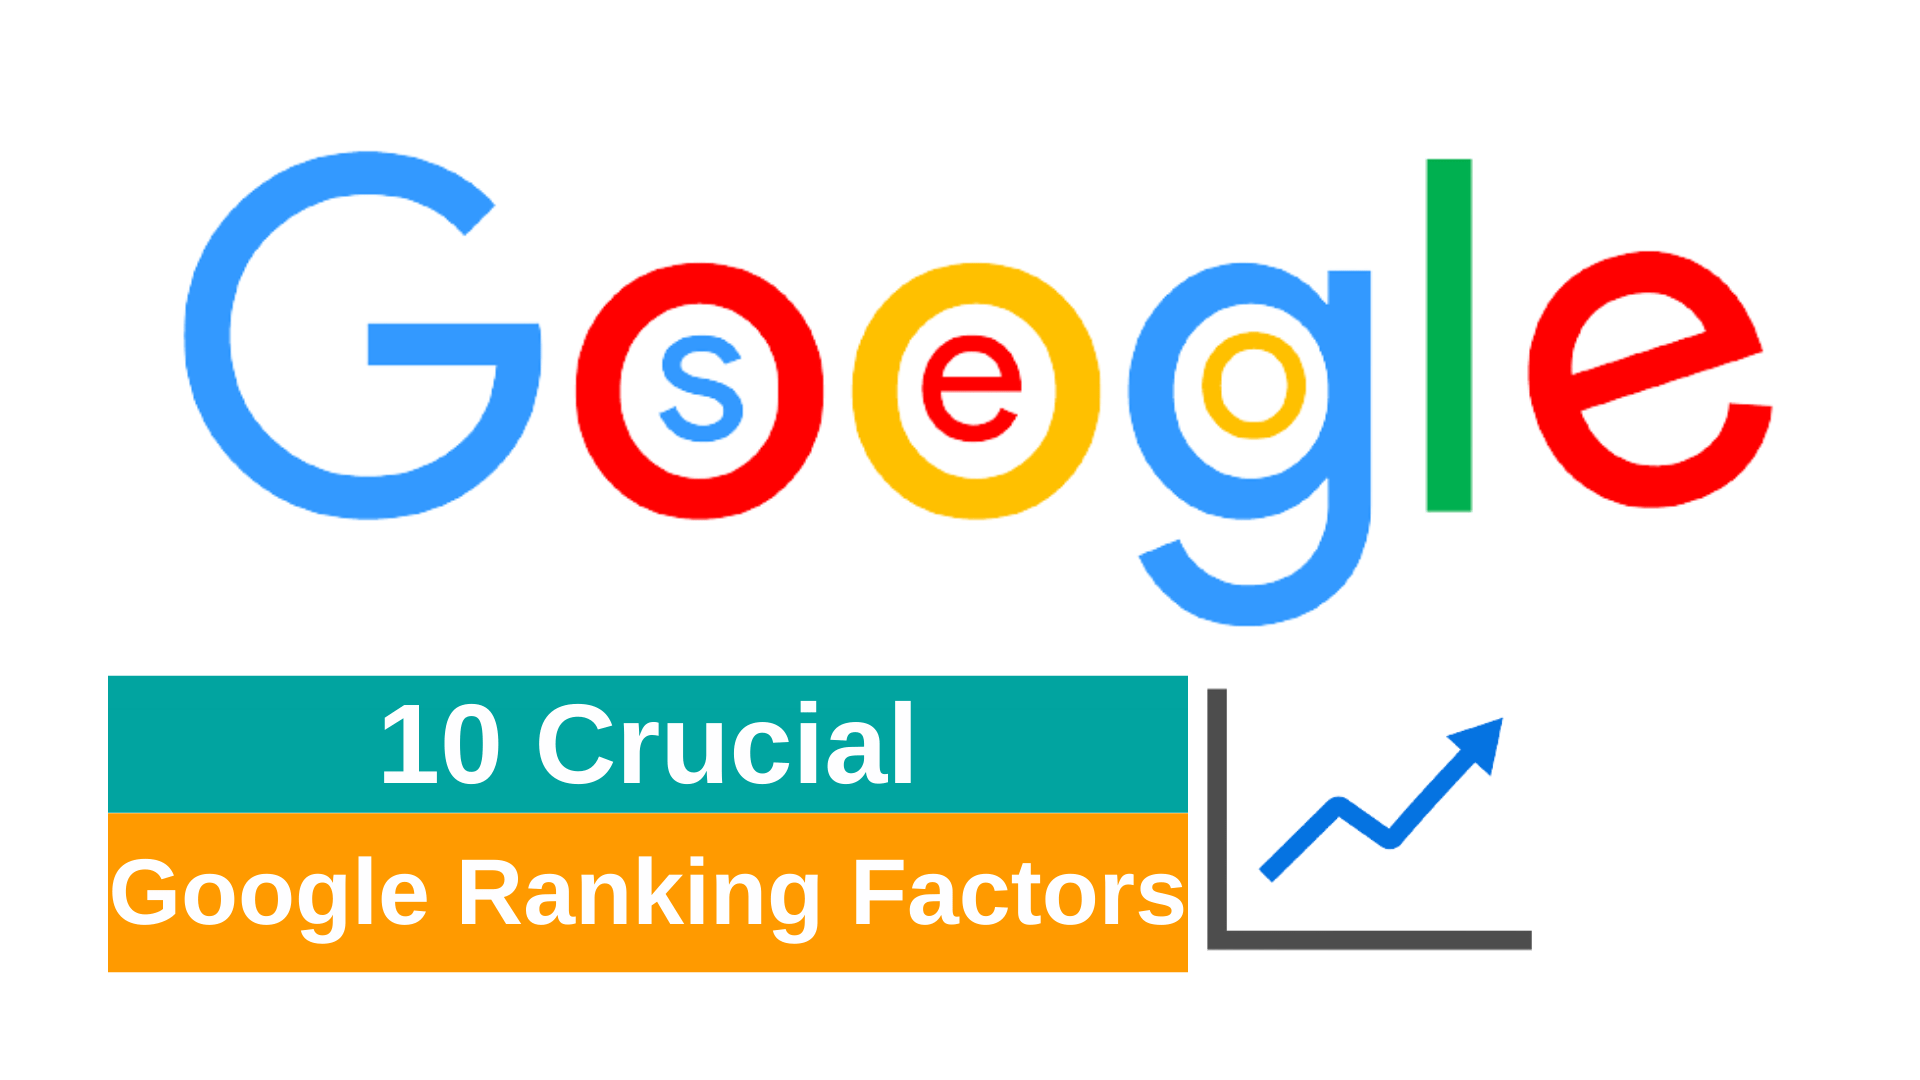 10 Crucial Google ranking Factors for 2022